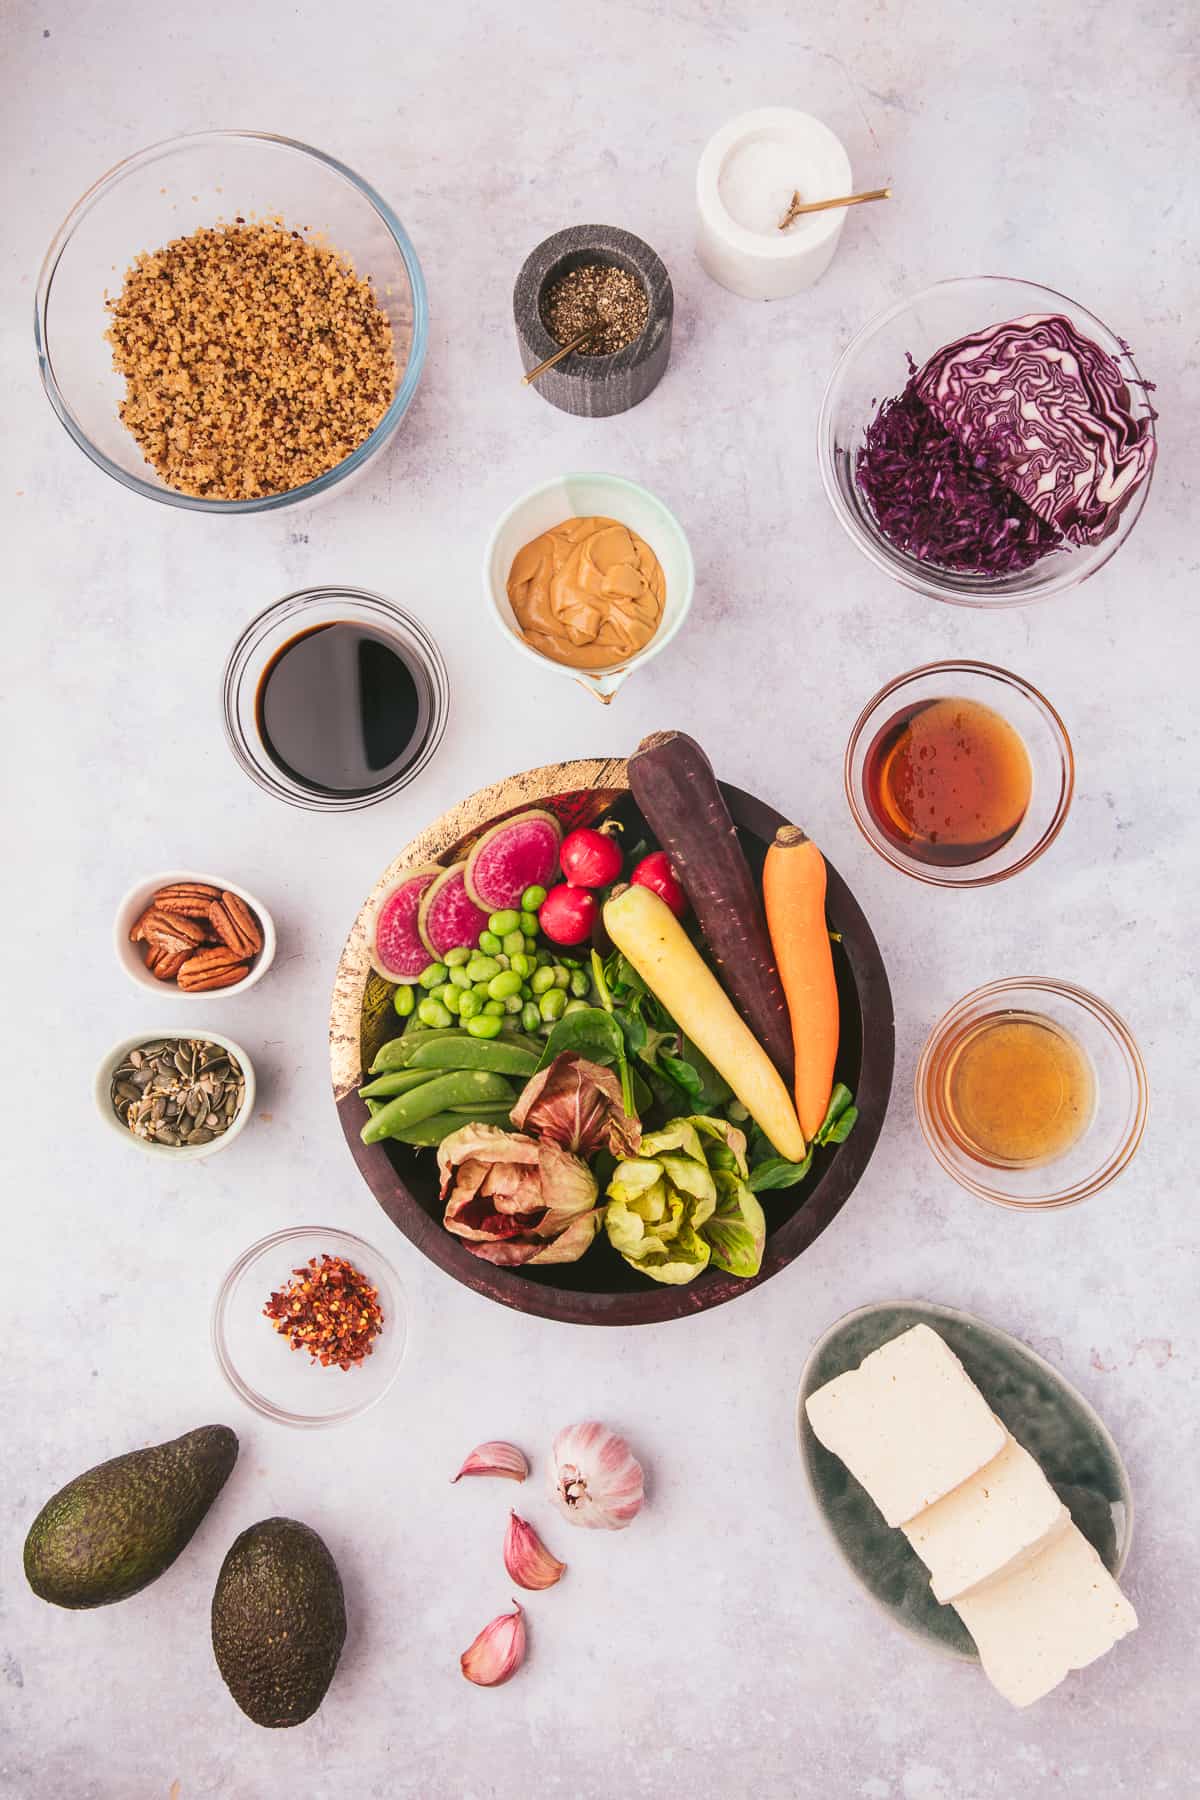 The ingredients for vegan buddha bowls are placed on a white surface.